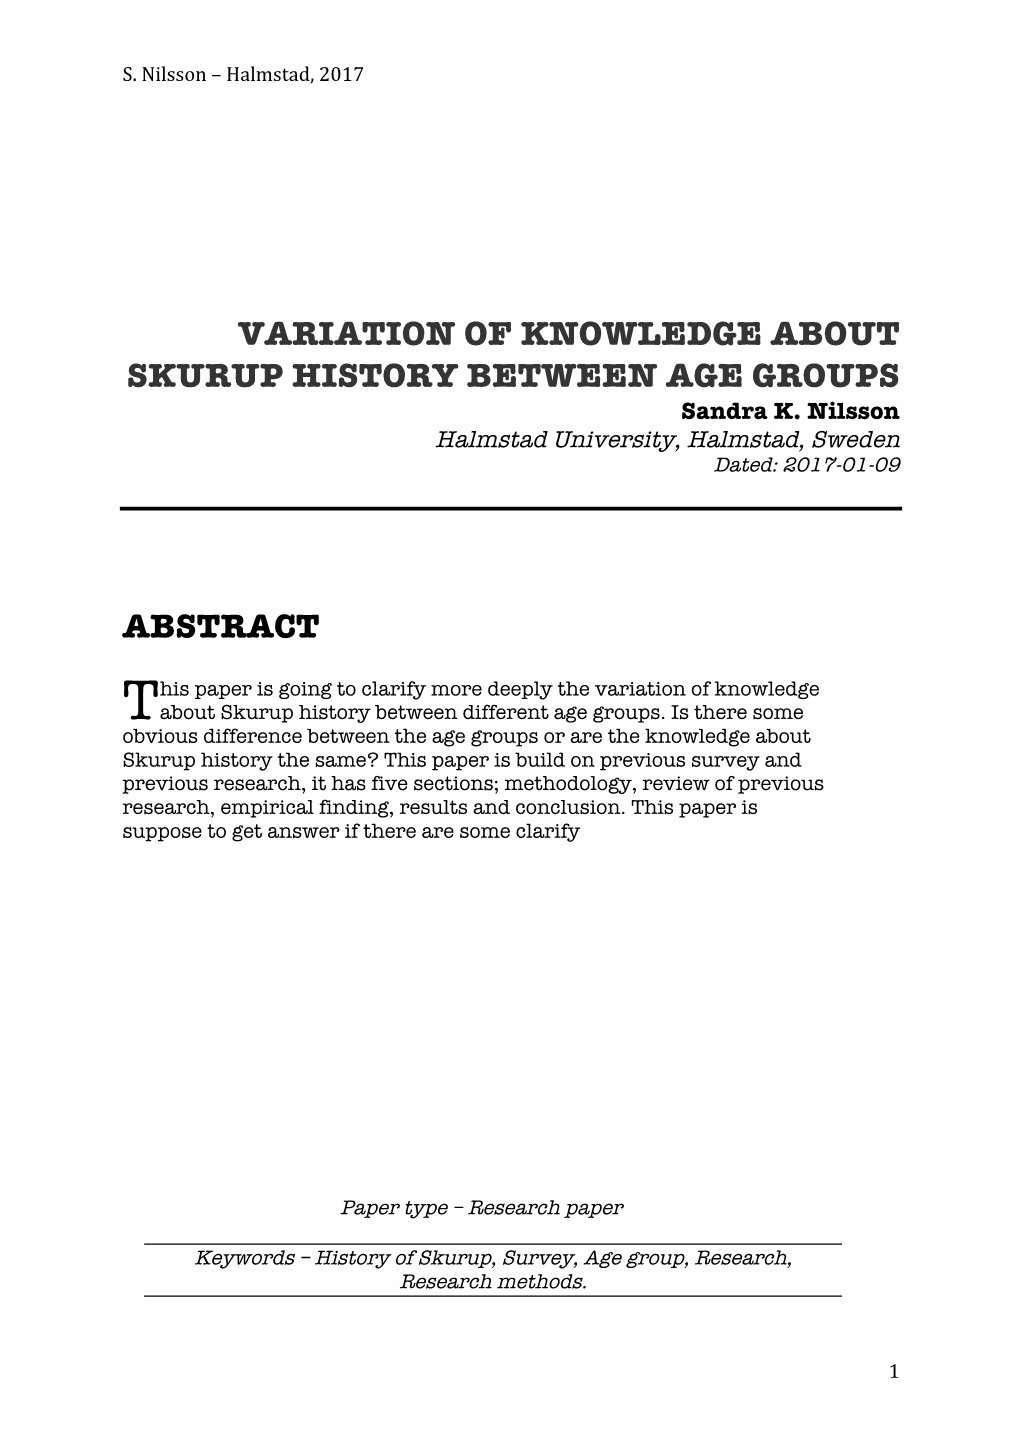 VARIATION of KNOWLEDGE ABOUT SKURUP HISTORY BETWEEN AGE GROUPS Sandra K